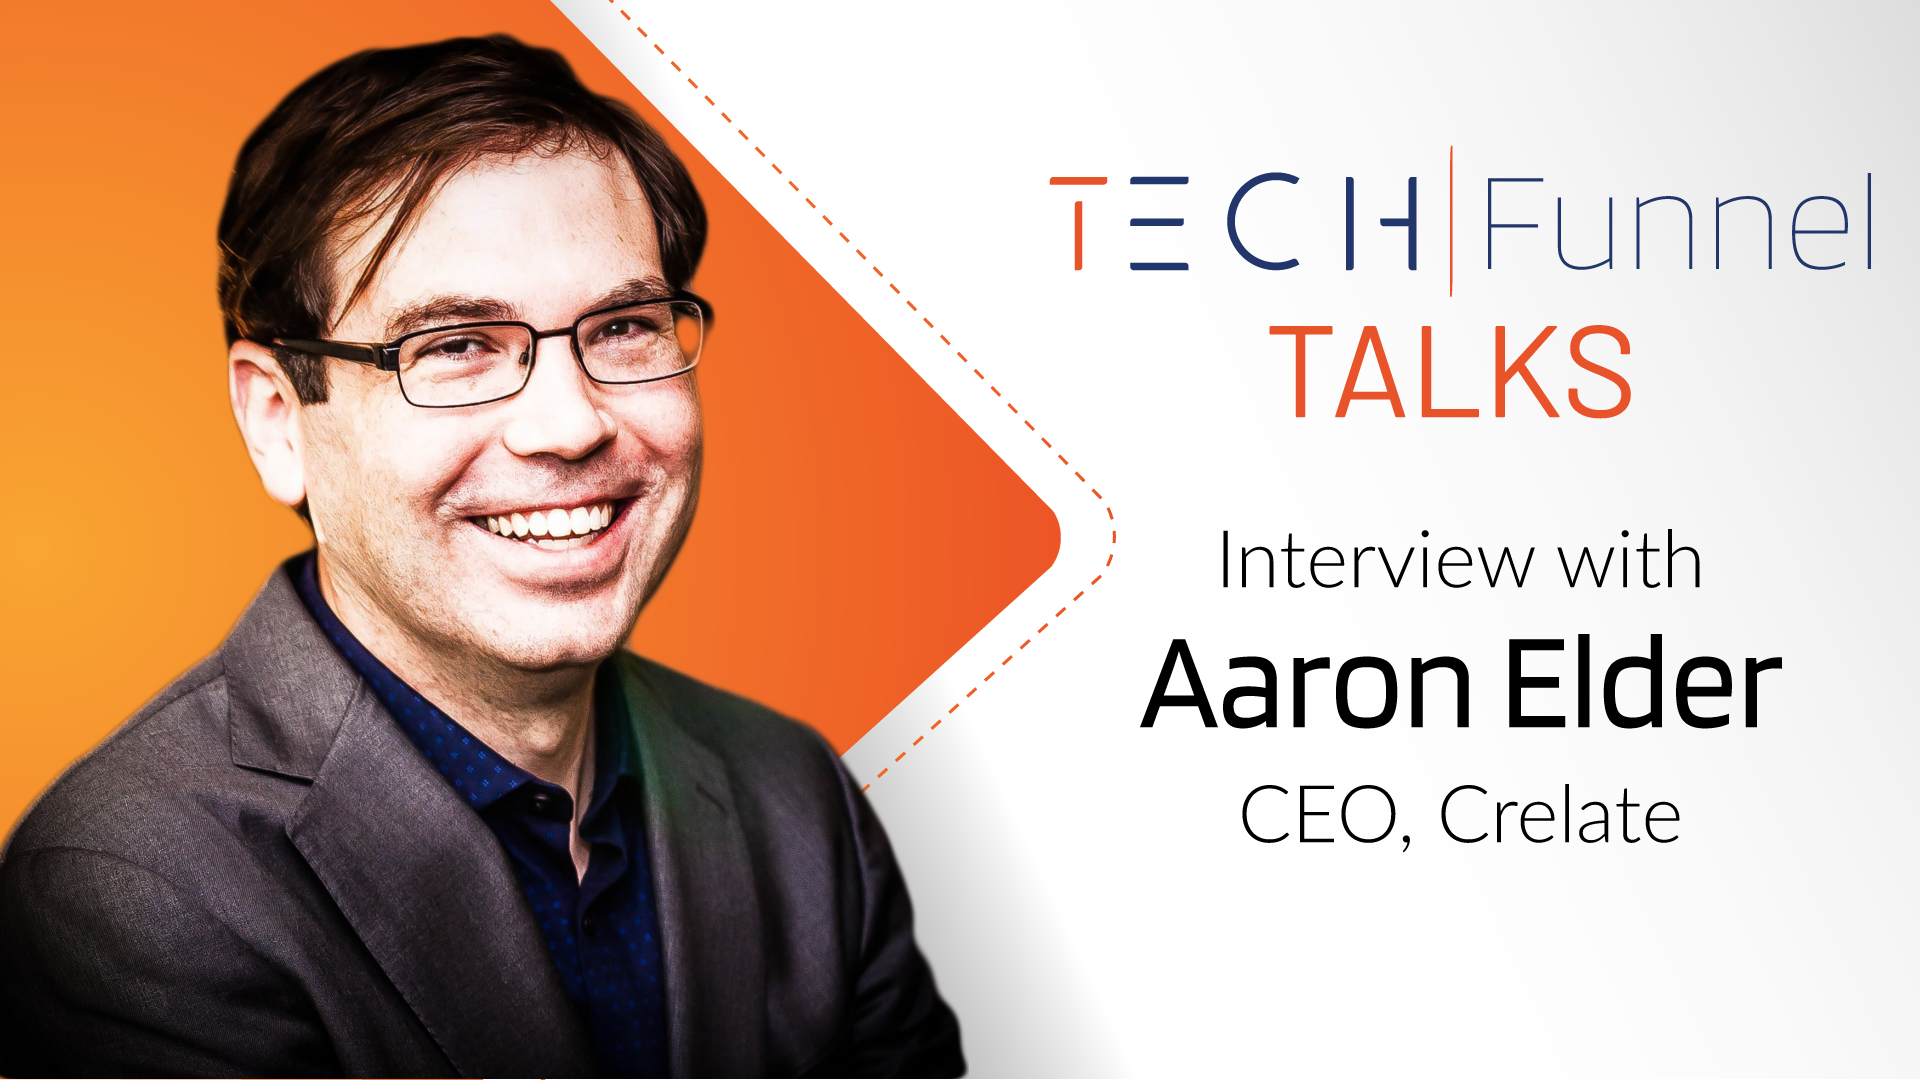 In this interview Aaron Elder shares insights on modern recruitment